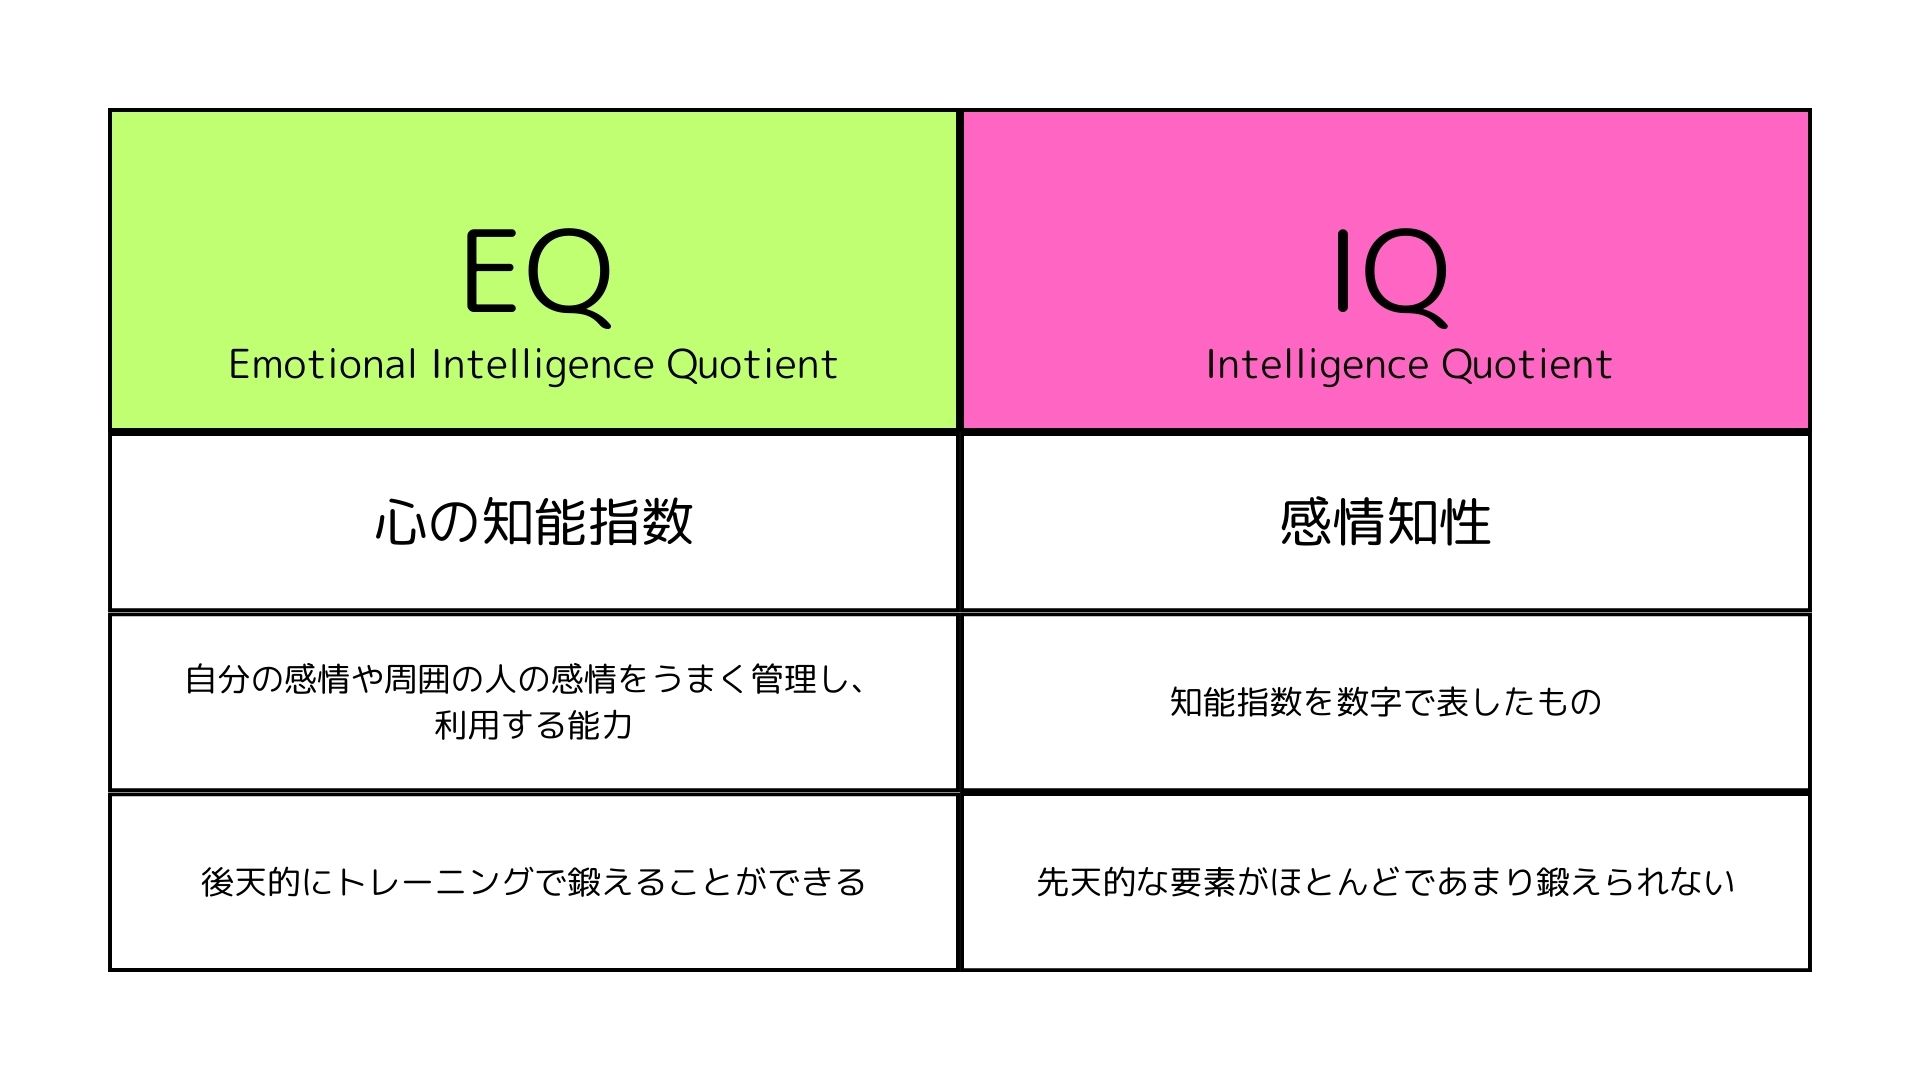 Difference between EQ and IQ